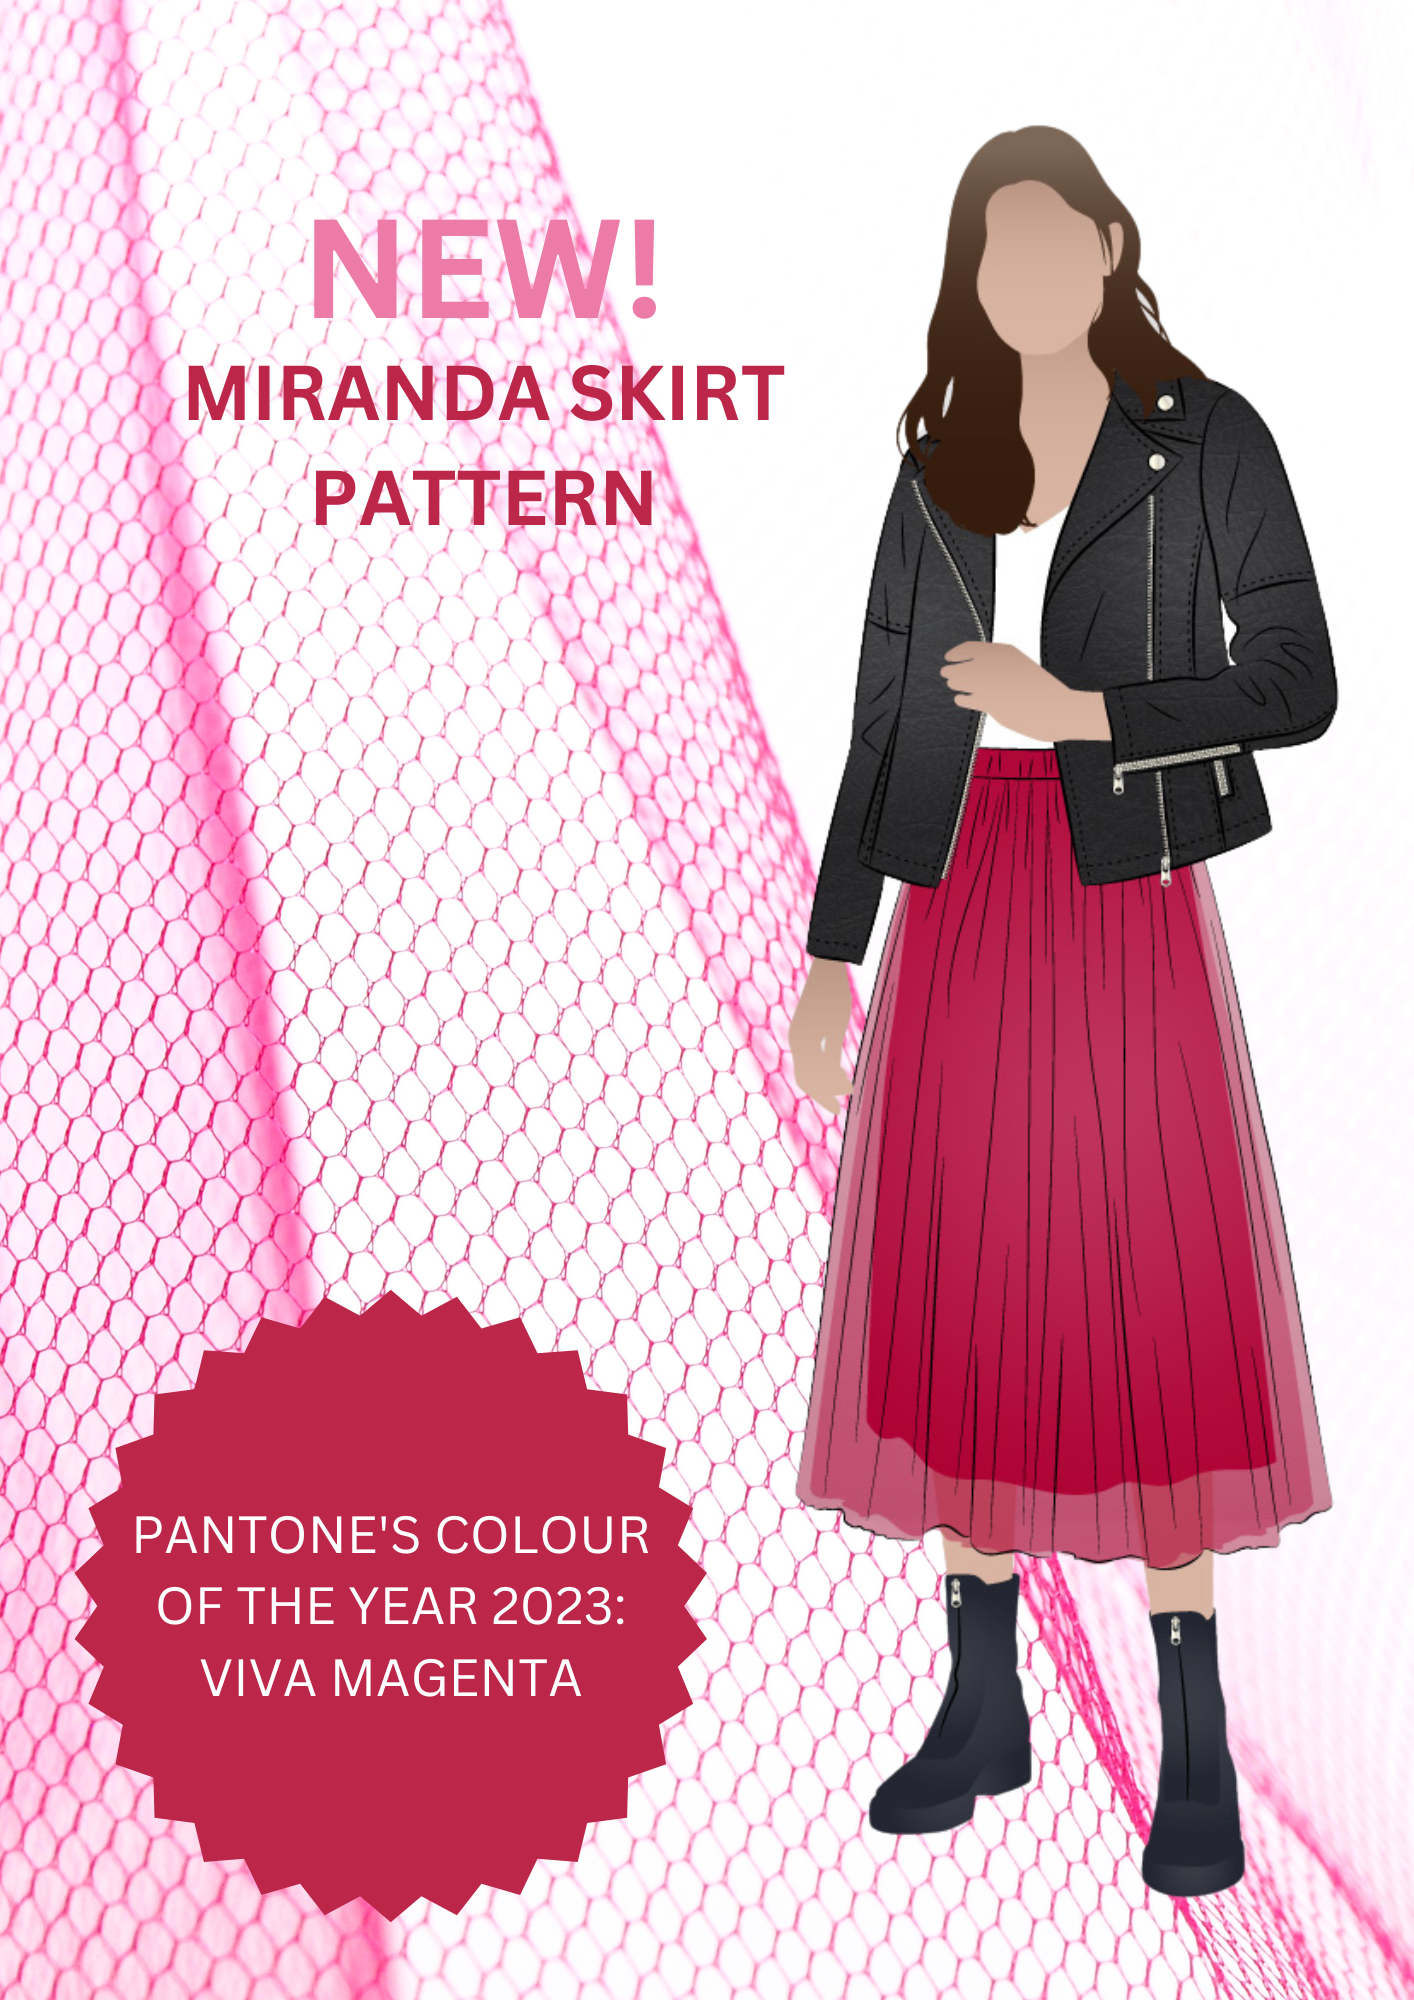 Why not try a pink tulle Miranda Skirt!